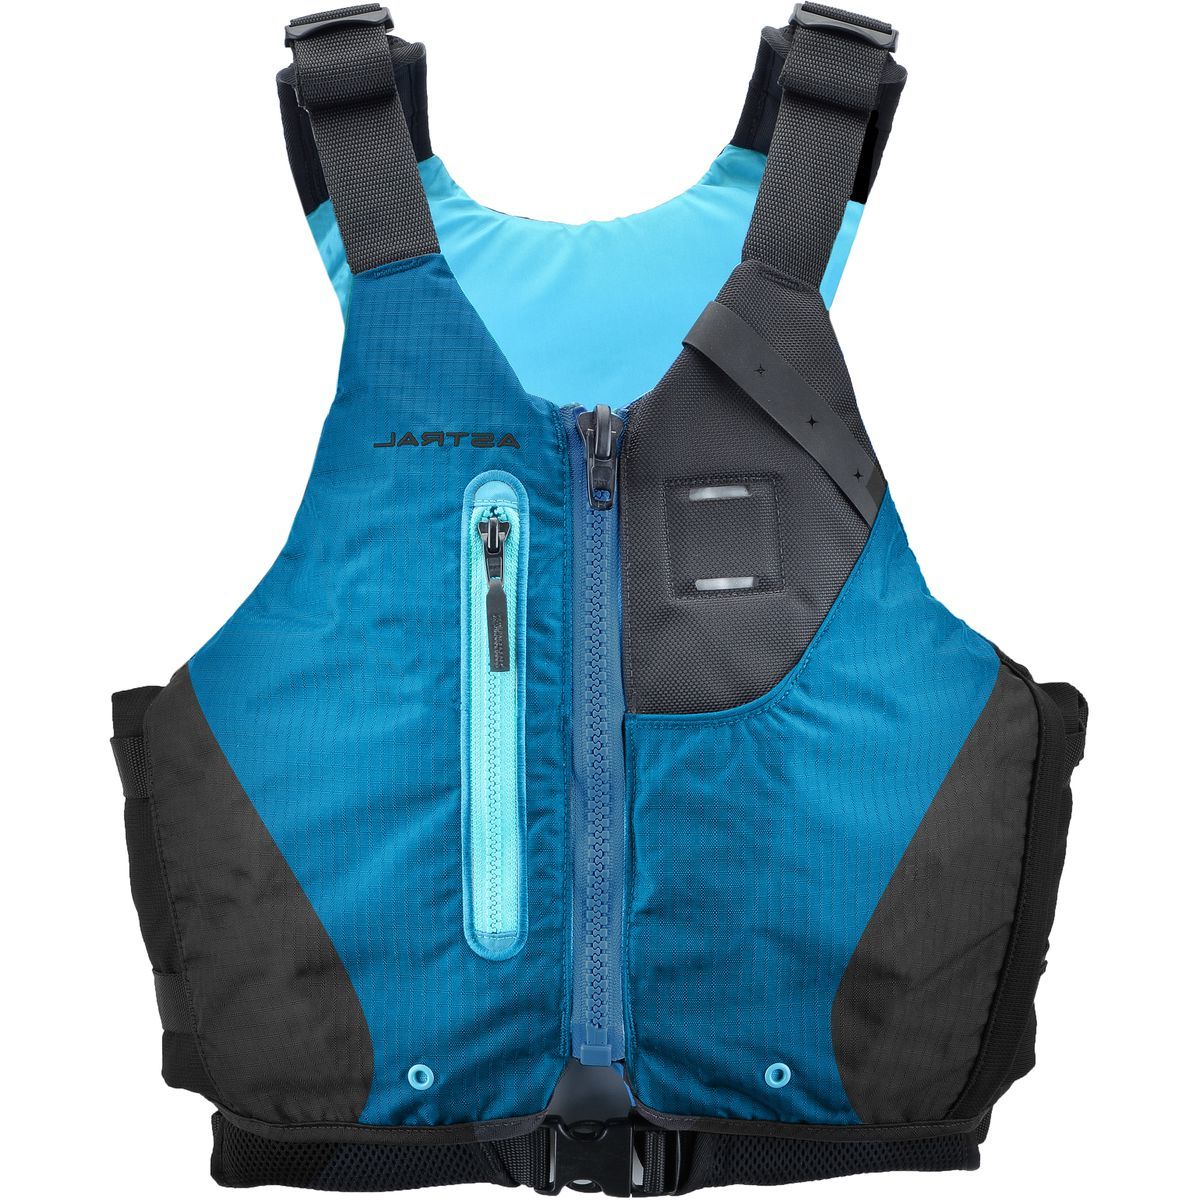 Astral Abba Personal Flotation Device - Women's